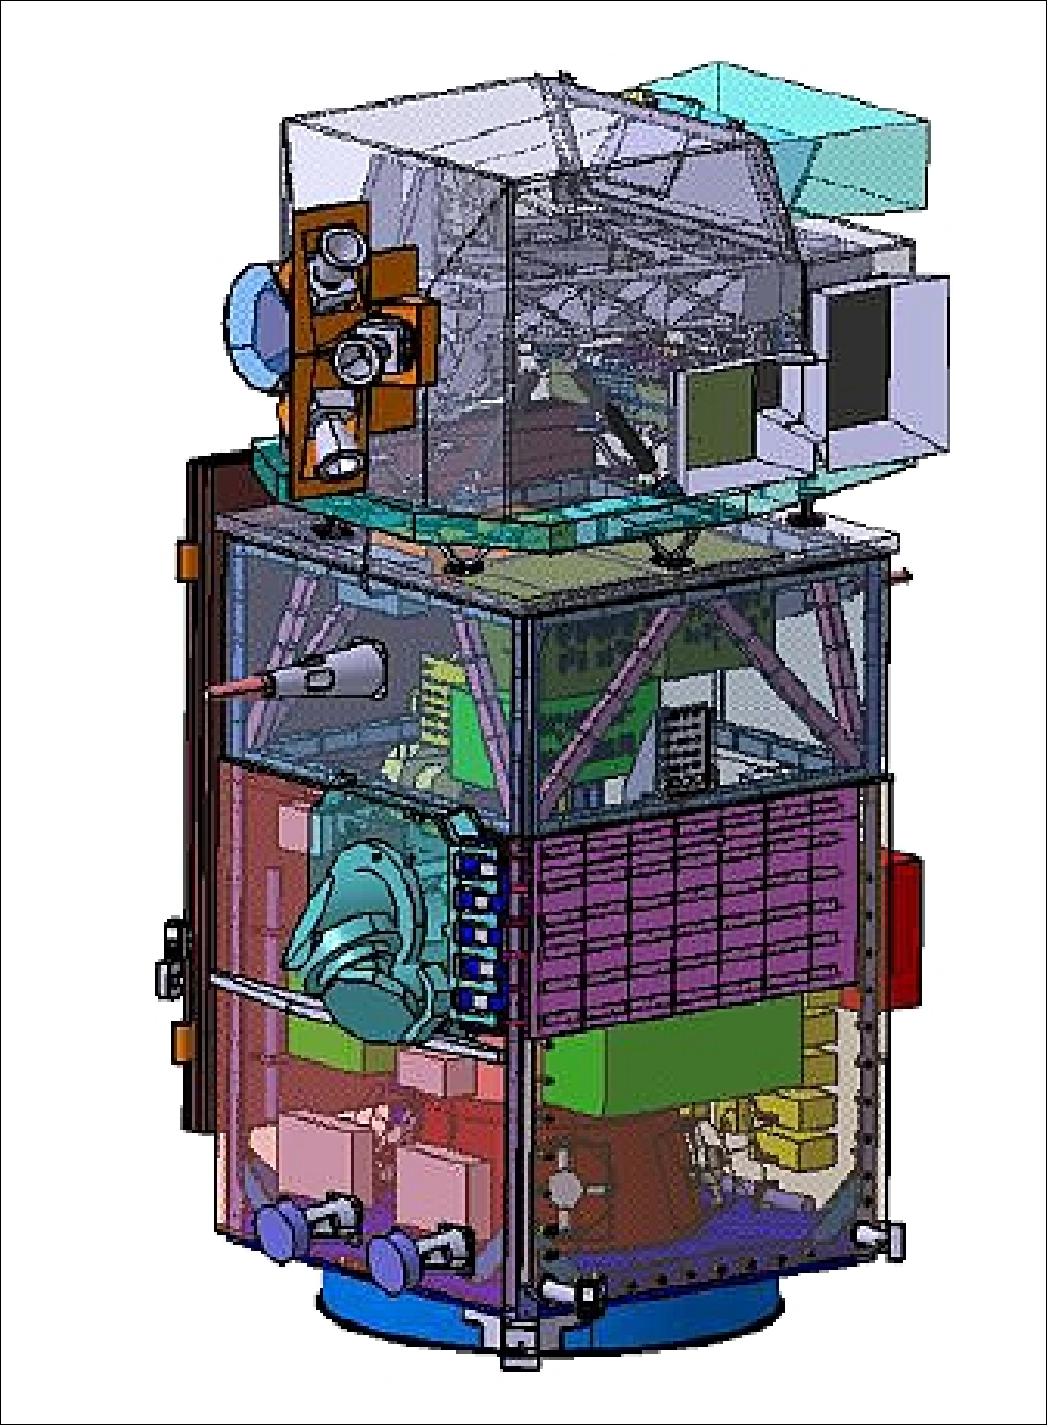 The Sentinel-2 spacecraft in launch configuration